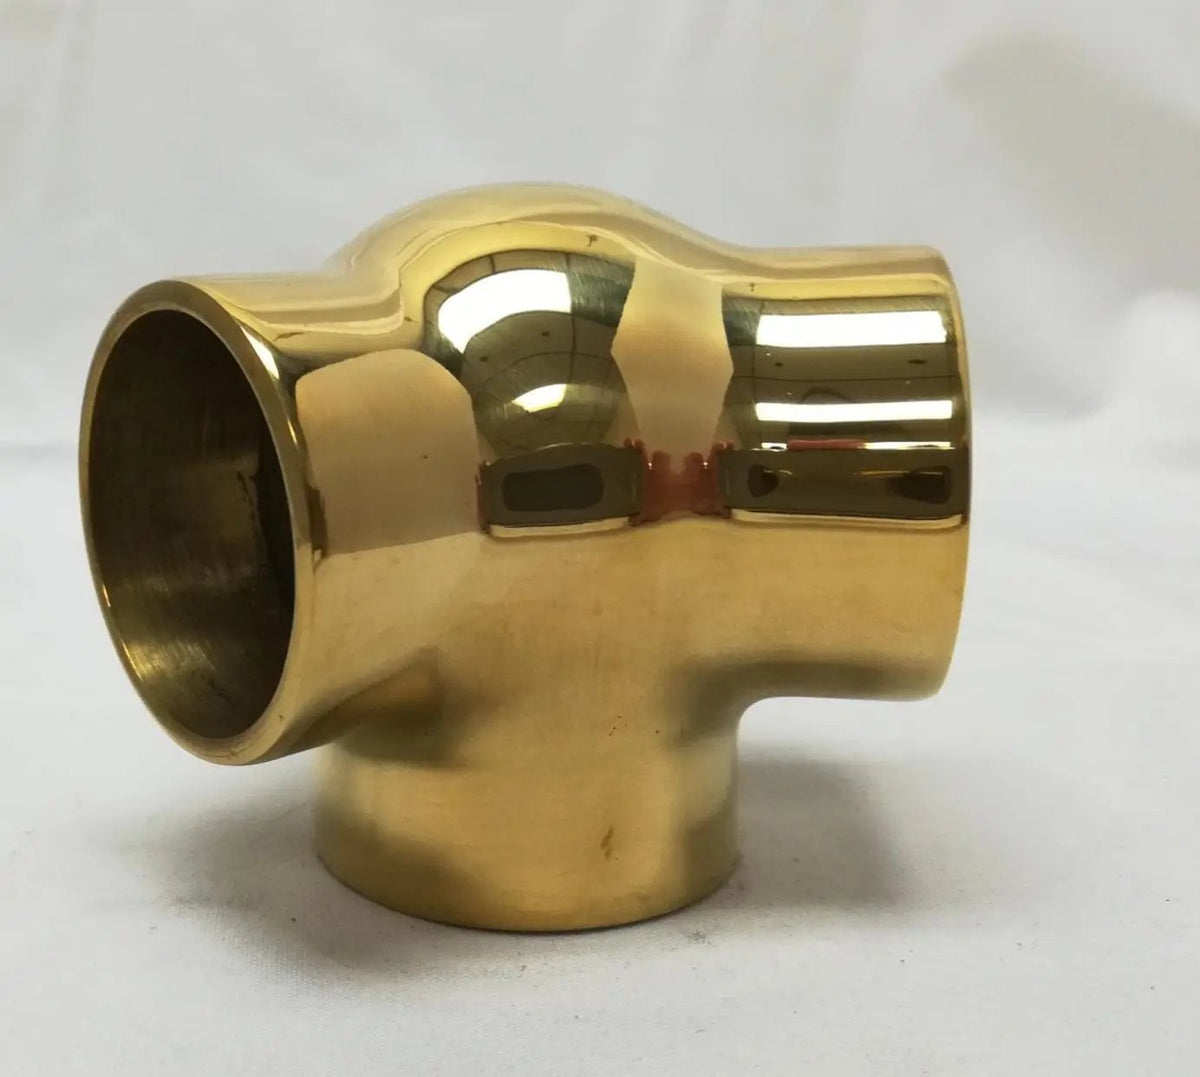 135° Ball Side Outlet Elbow for 1-1/2" Tubing Ball Fittings, Components for 1-1/2" Od Tubing ClearPowderCoatedFinish-PleaseCall Trade Diversified